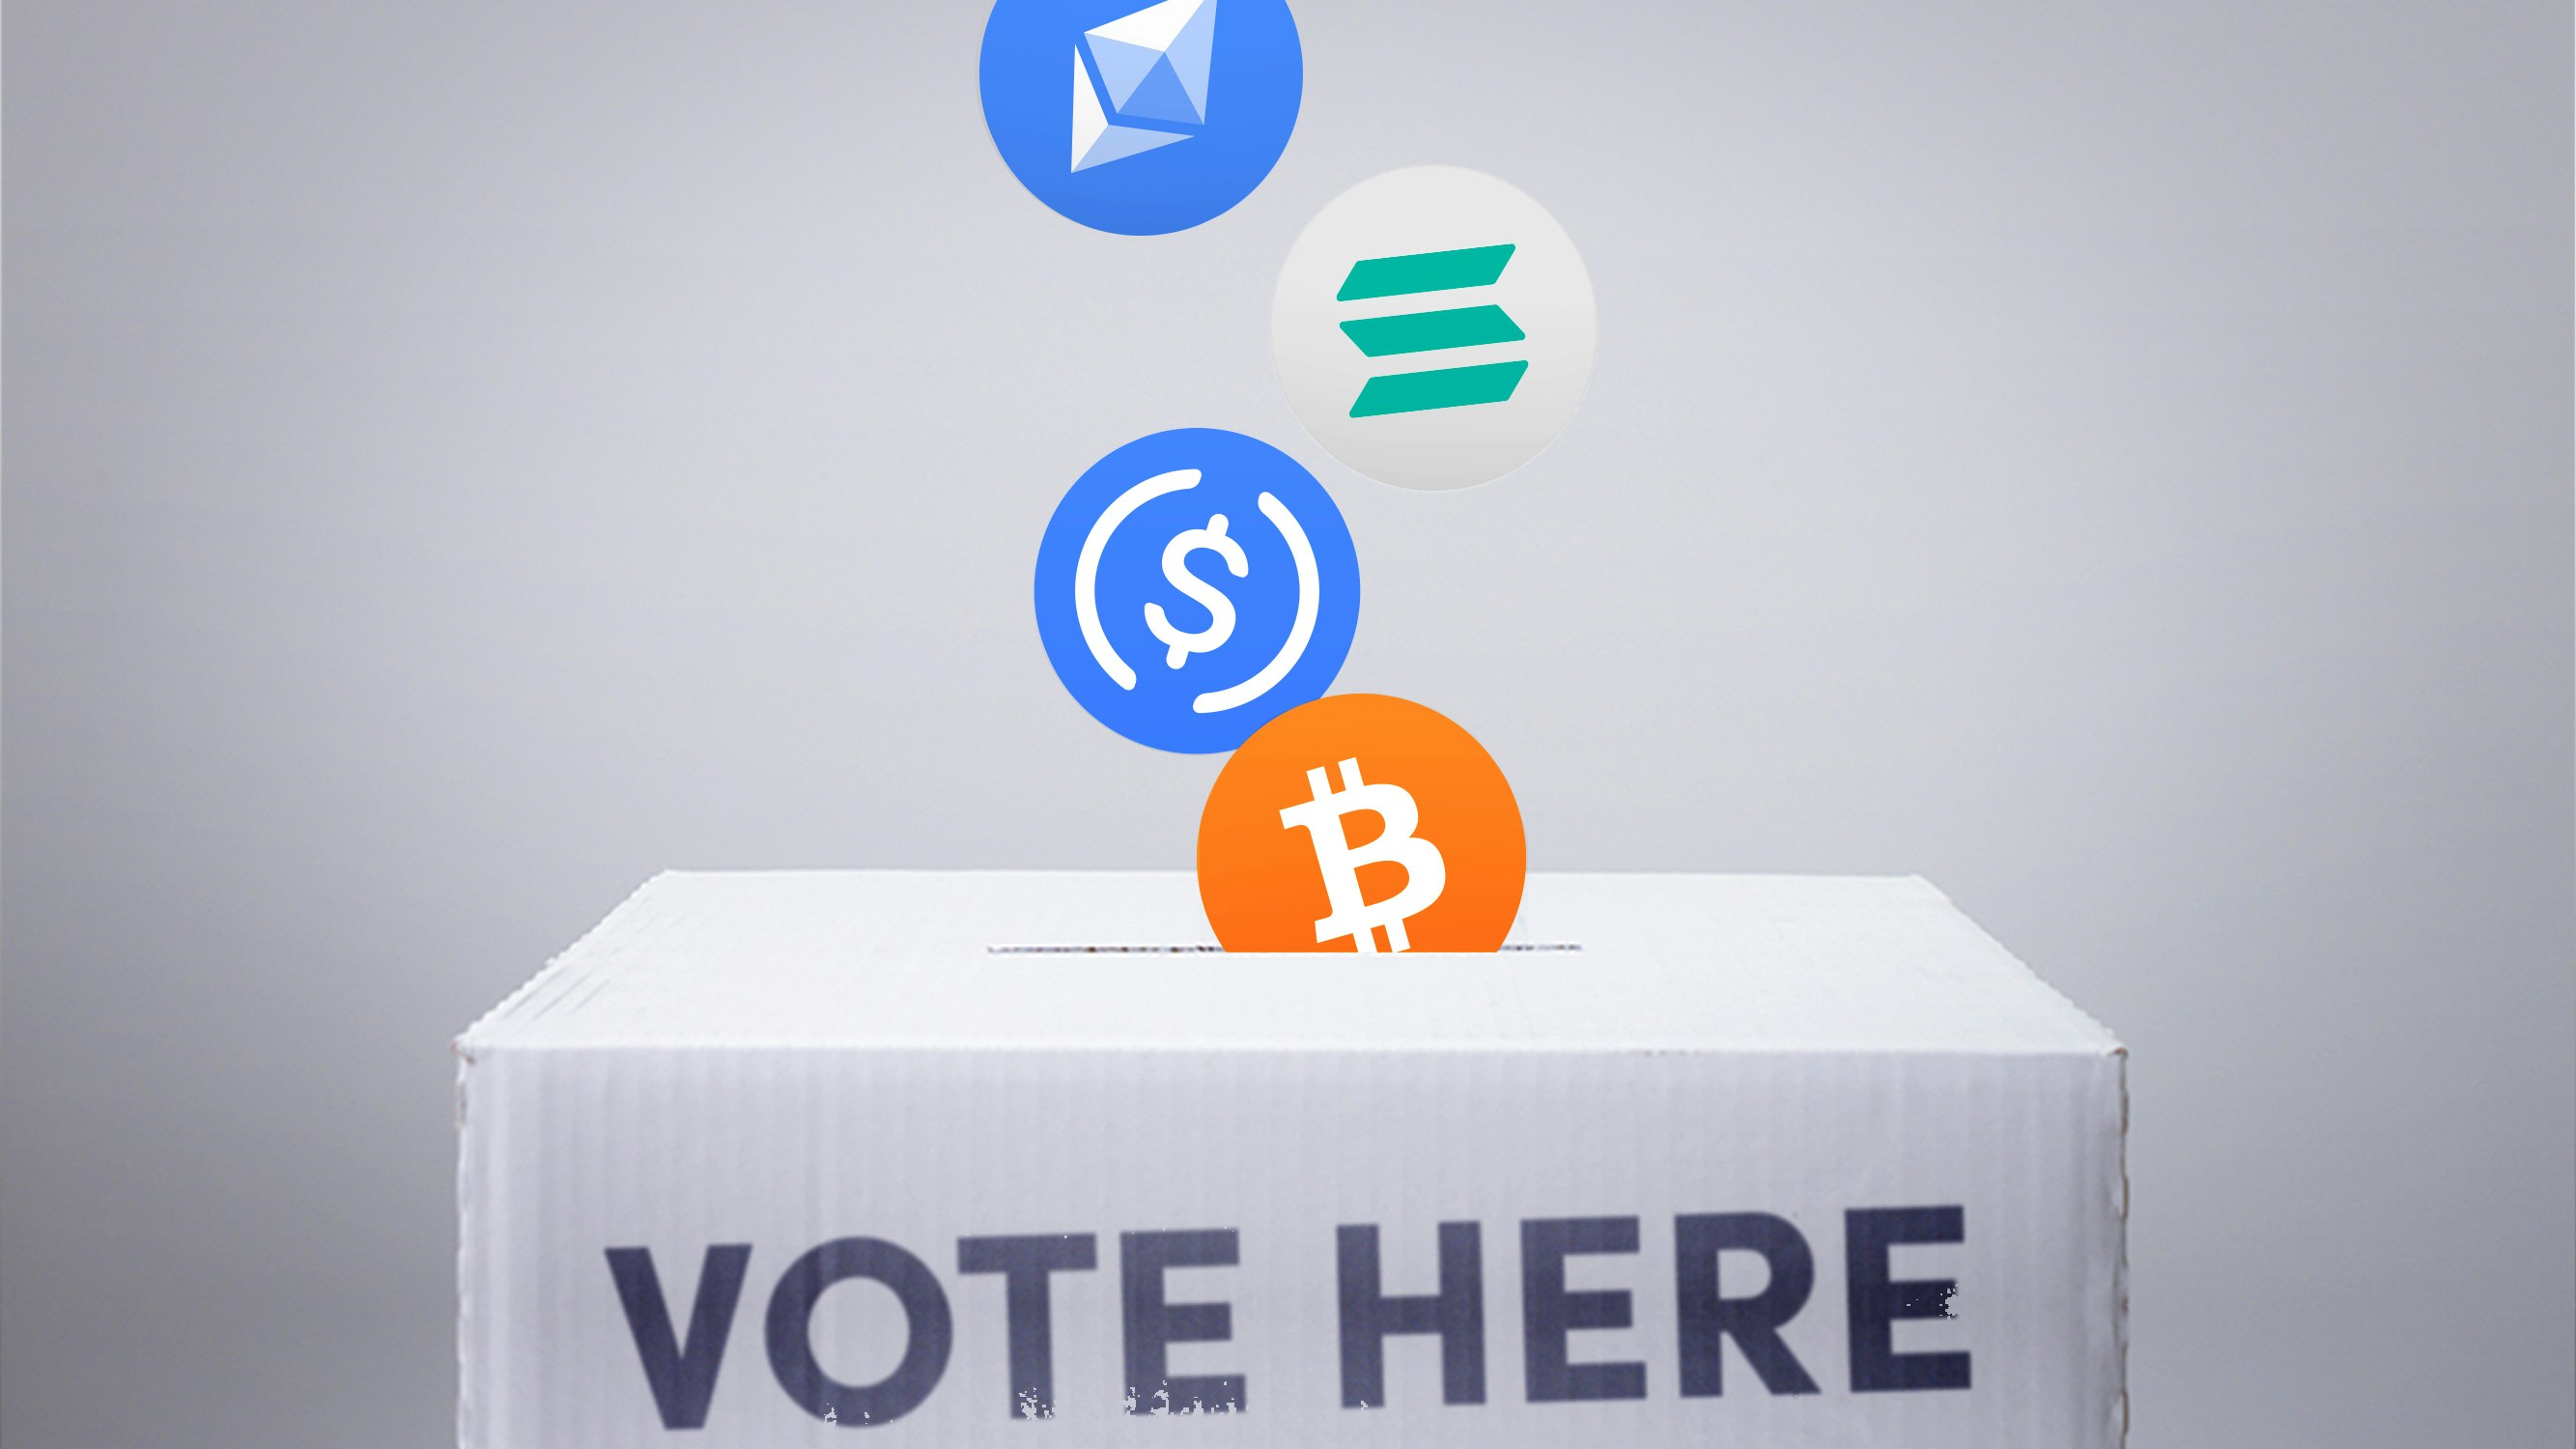 icons for various cryptocurrency bitcoin ethereum solana USDC dropping into ballot box with 'VOTE HERE' printed on side